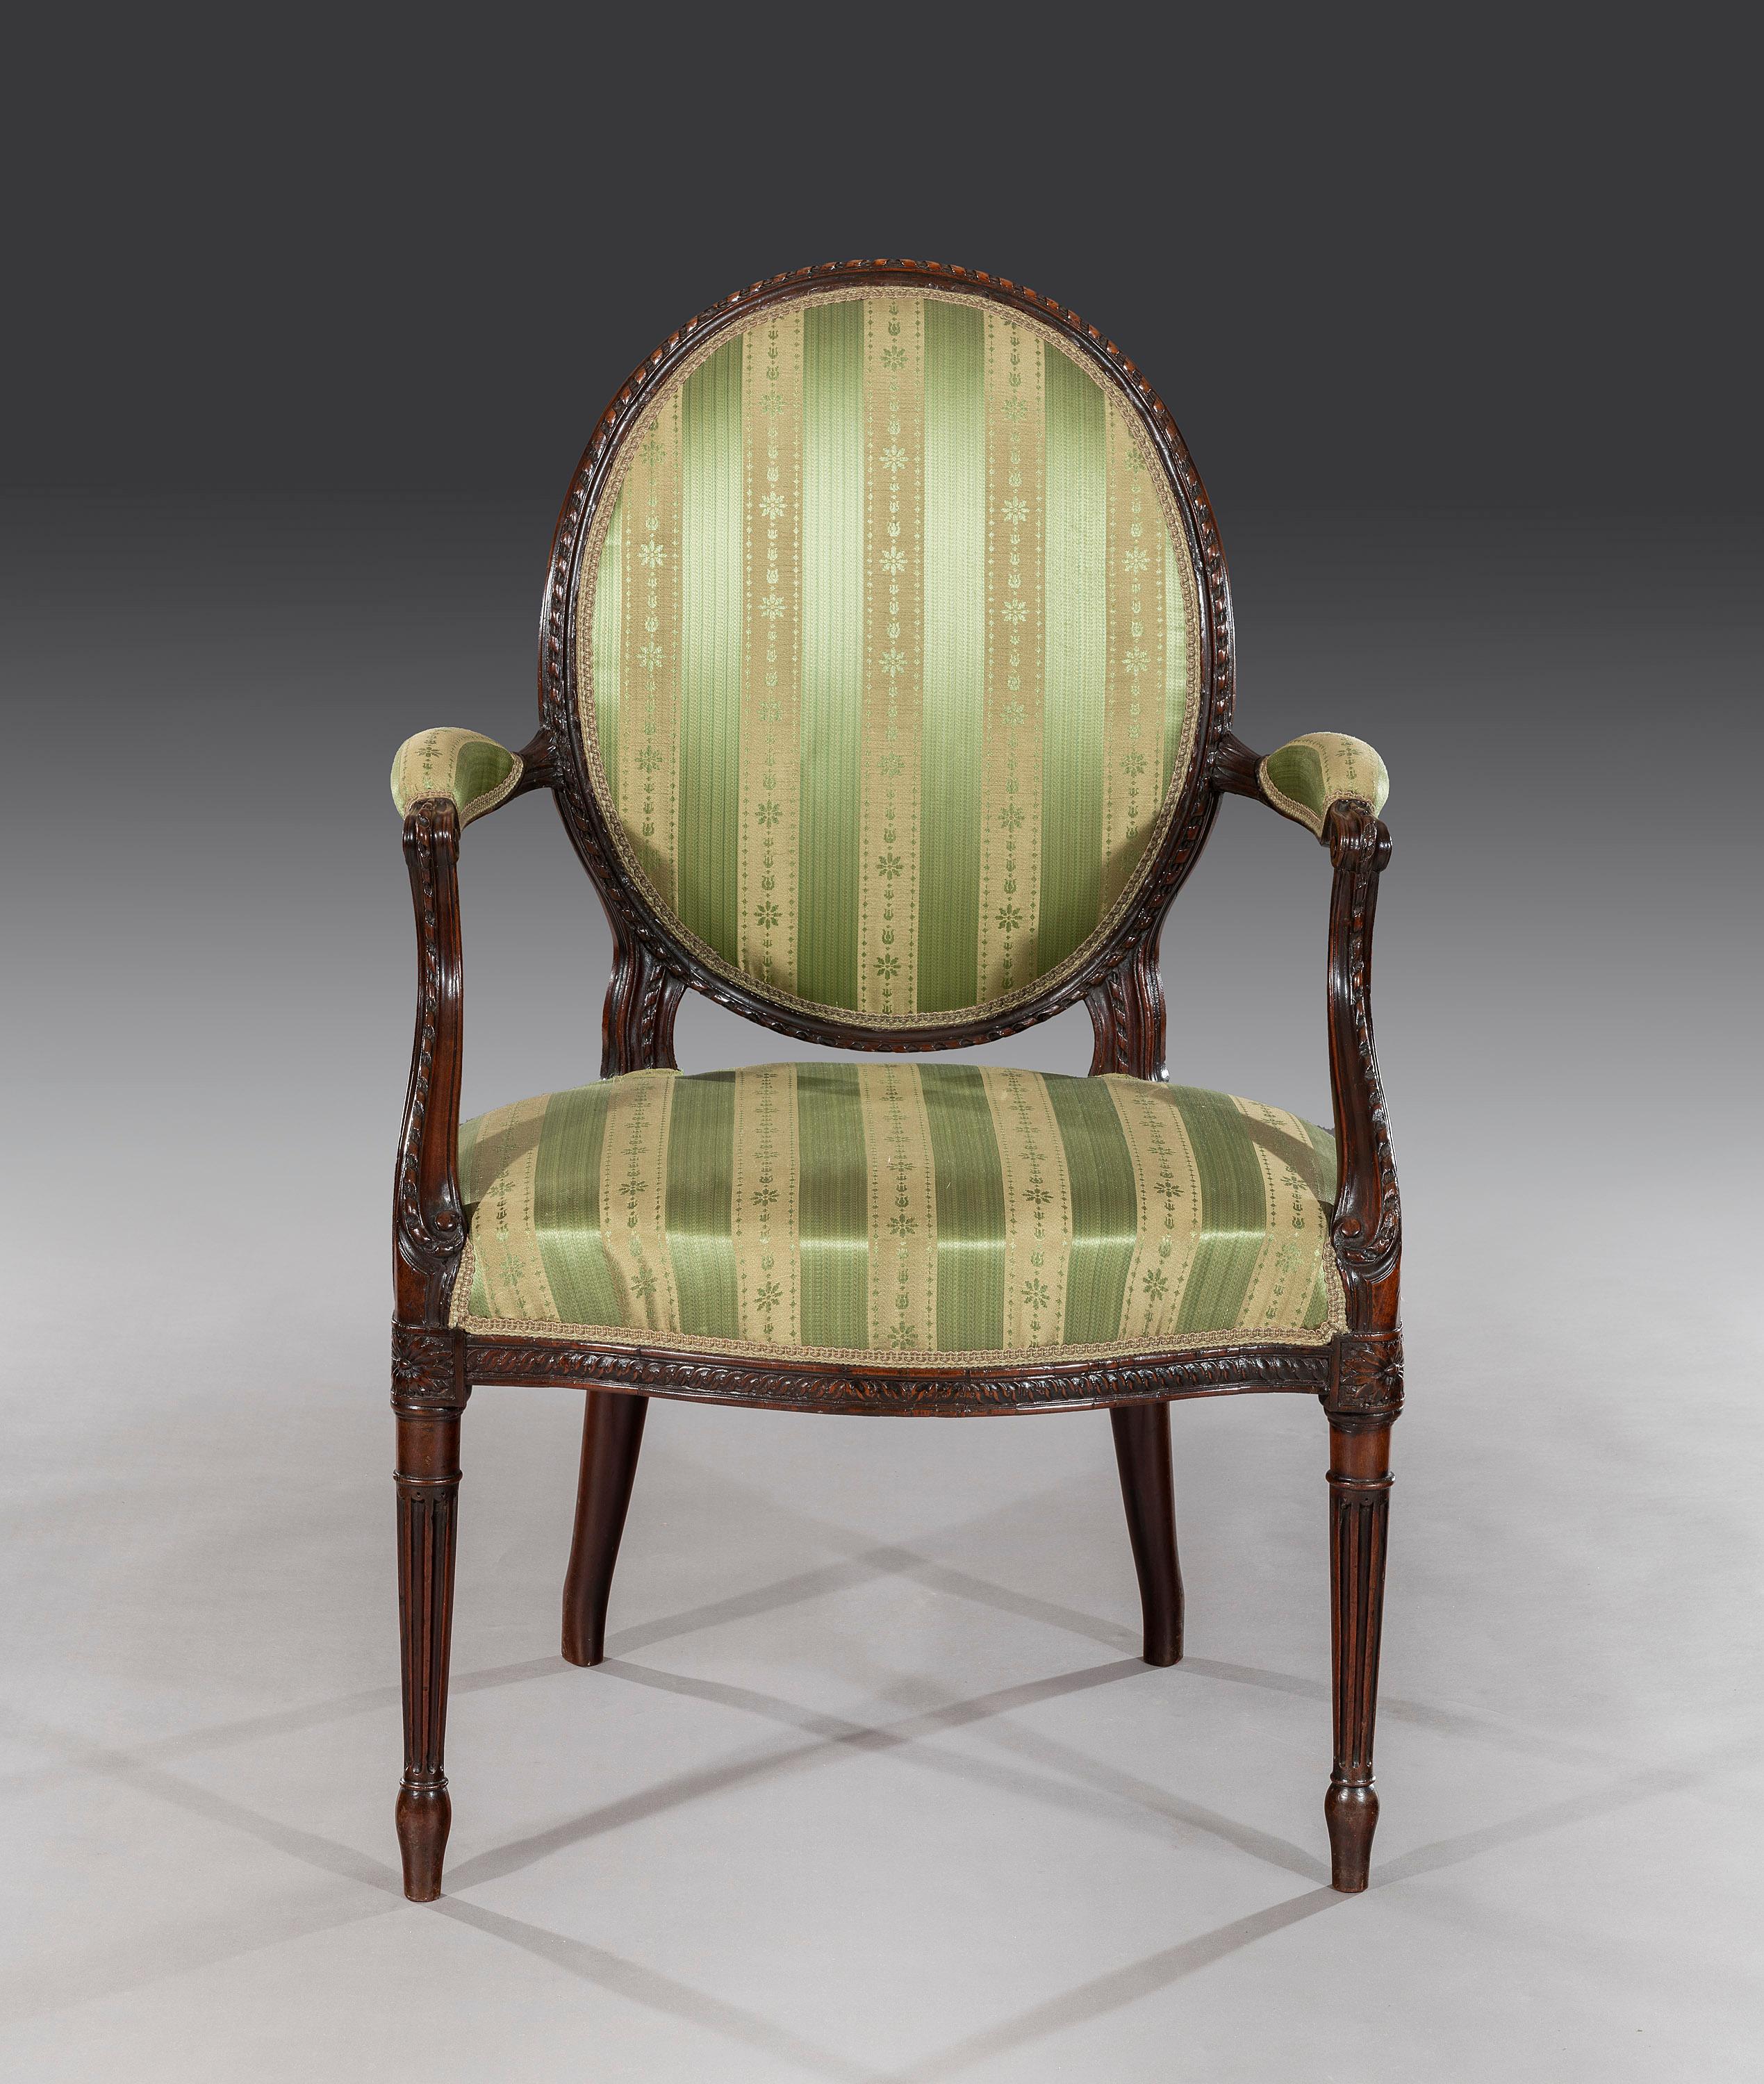 The elegant chair is carved throughout and has recently been re-covered in patterned green silk fabric.

Measures: Seat height 44.00 cm.